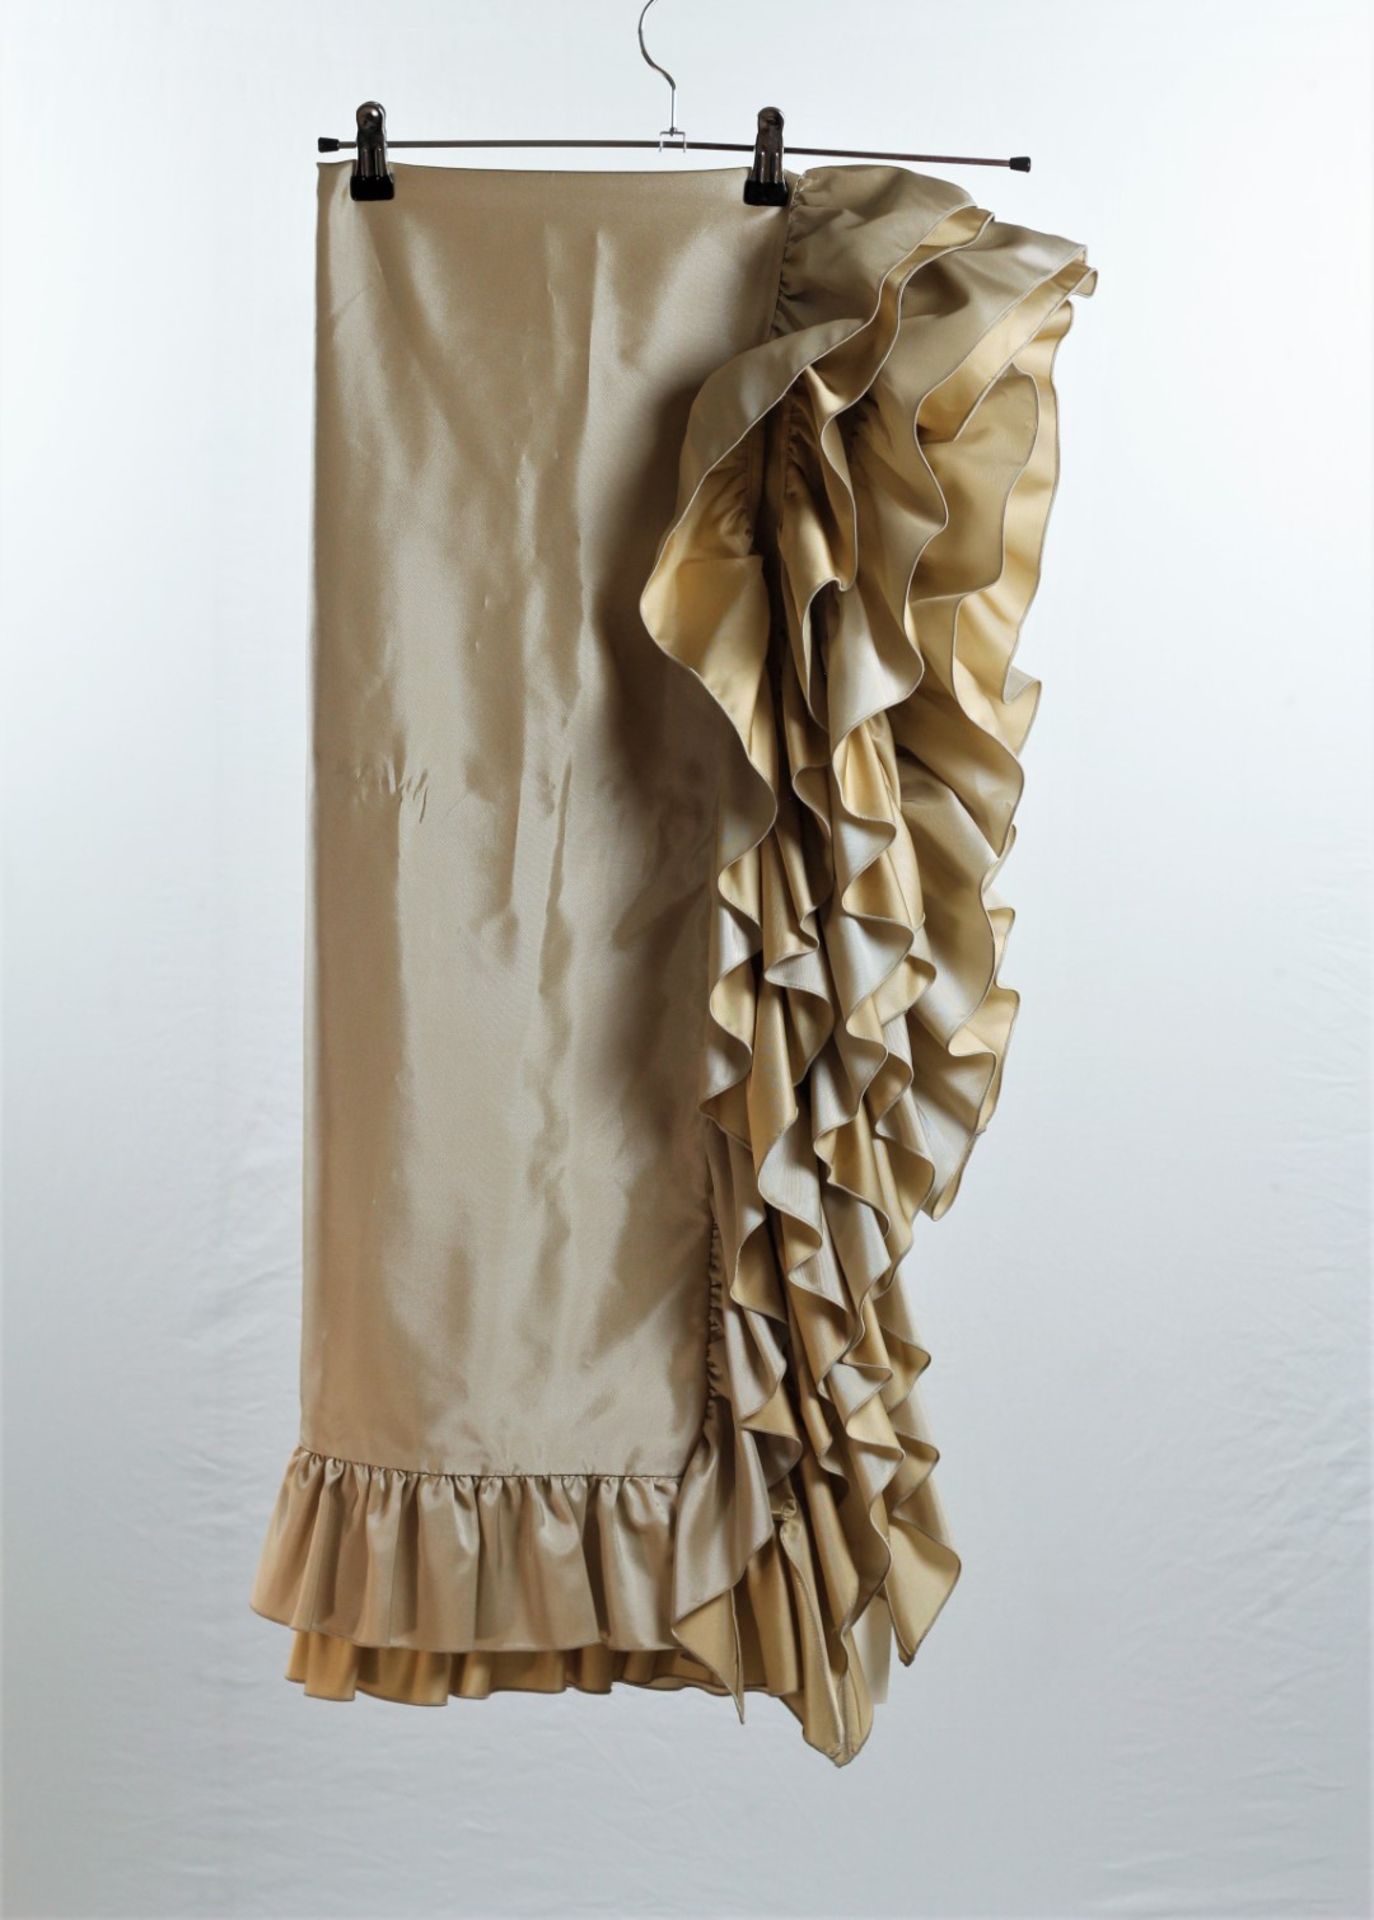 1 x Boutique Le Duc Champagne Wrap/Shawl - From a High End Clothing Boutique In The - Image 7 of 8